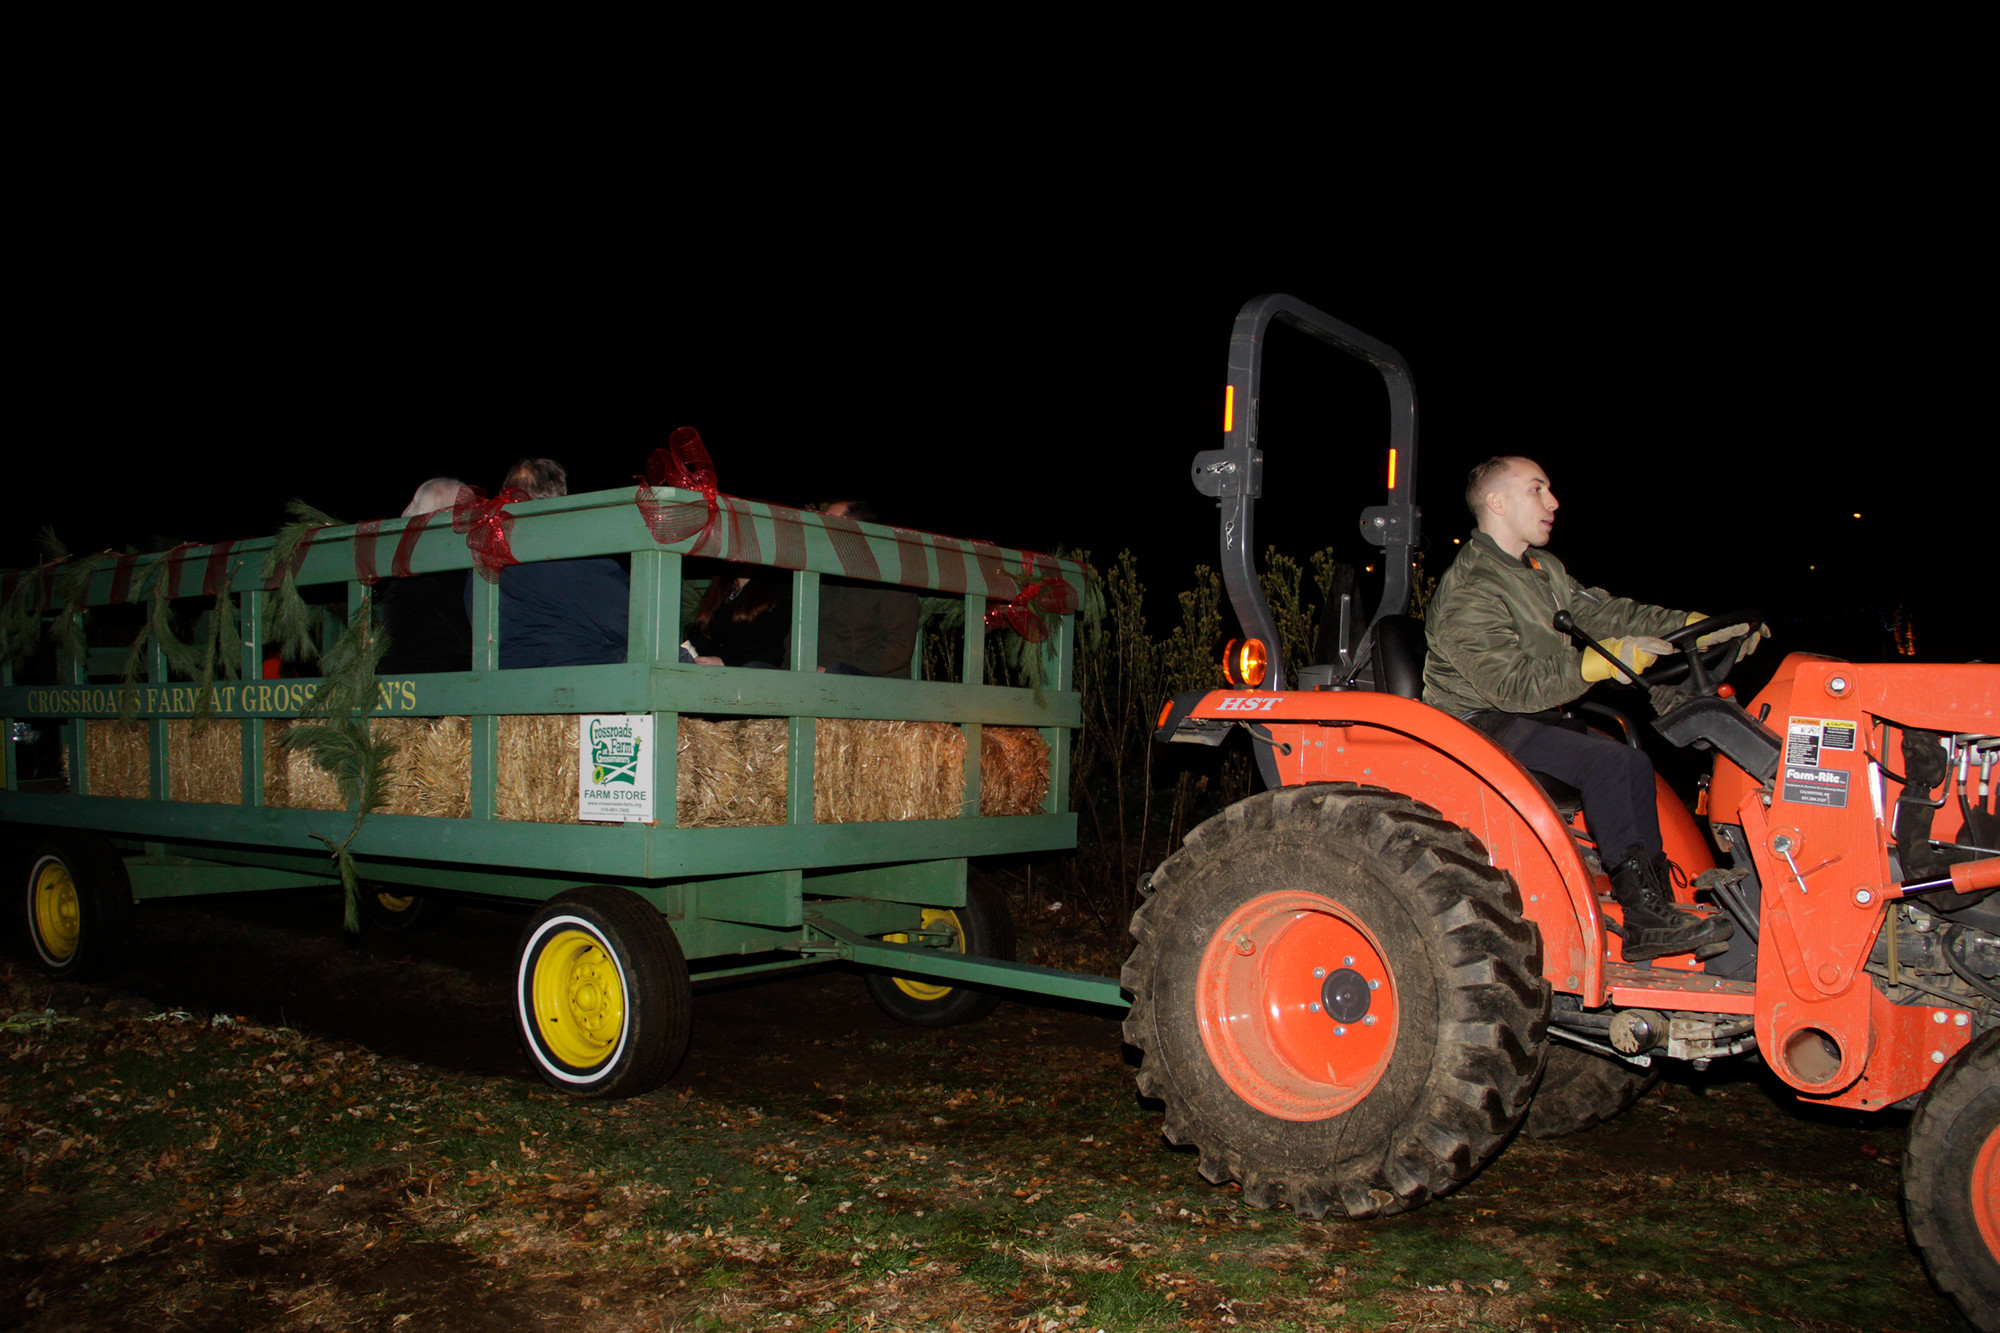 Michael Forlife volunteered his give a hayride to those who visited Crossroads Farm on the day of the lighting.